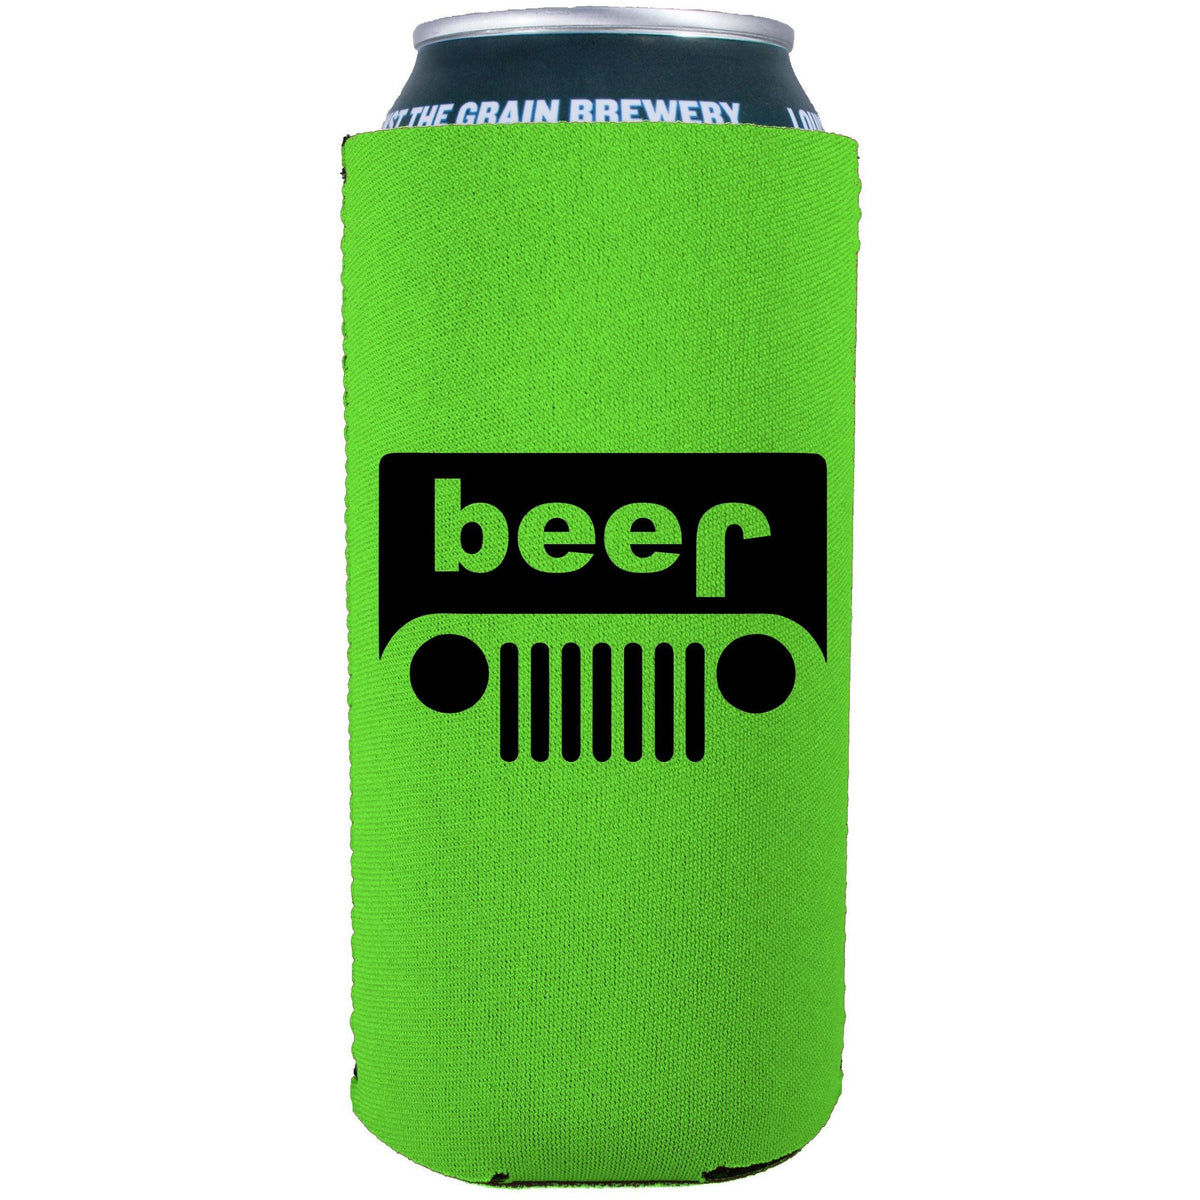 Beer jeep 16 oz. Can Coolie – Coolie Junction